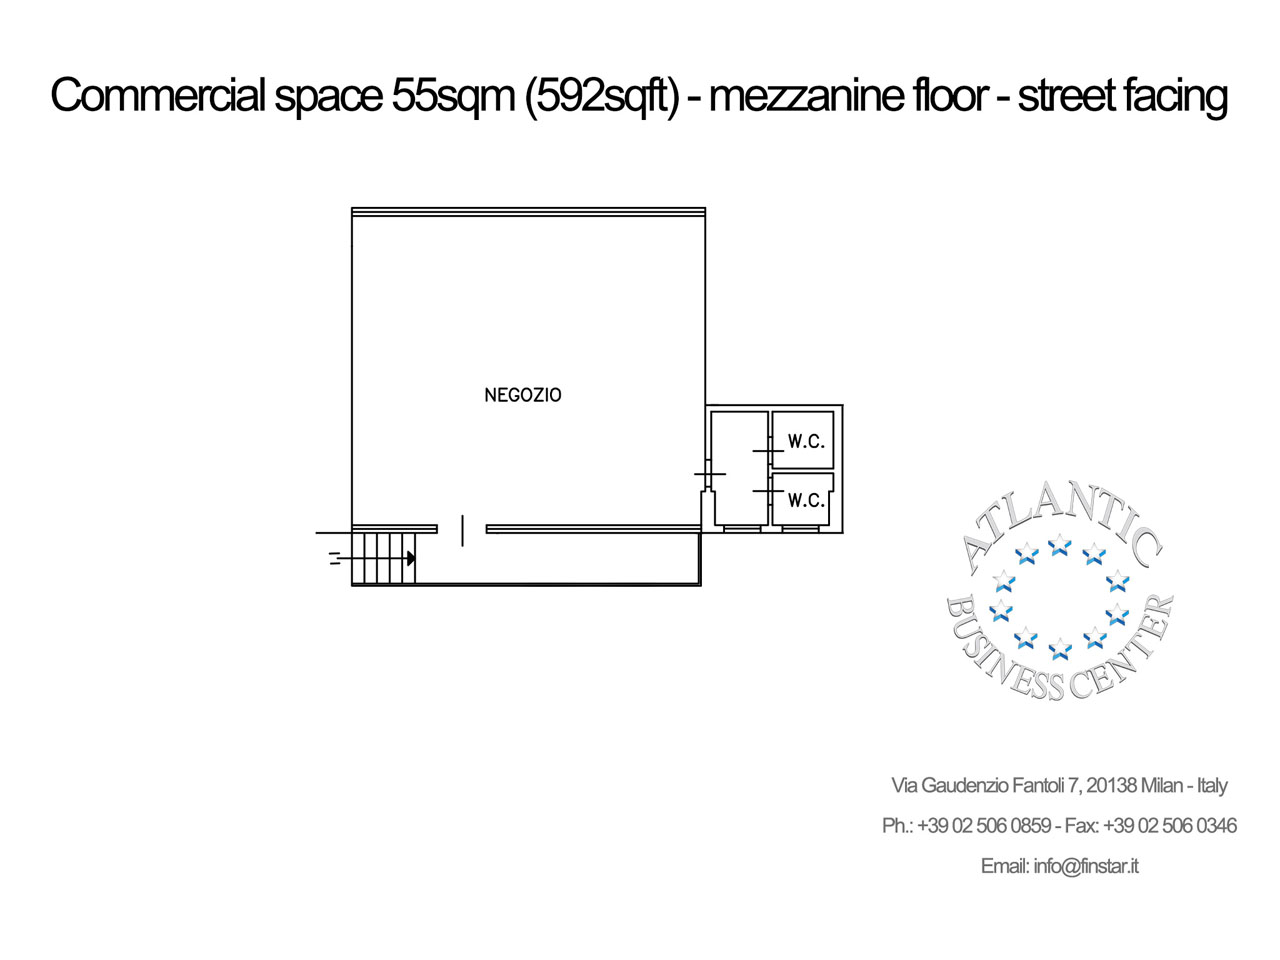 Store / Office for rent in Milan - 55 sq m (592 sq ft) floorplan